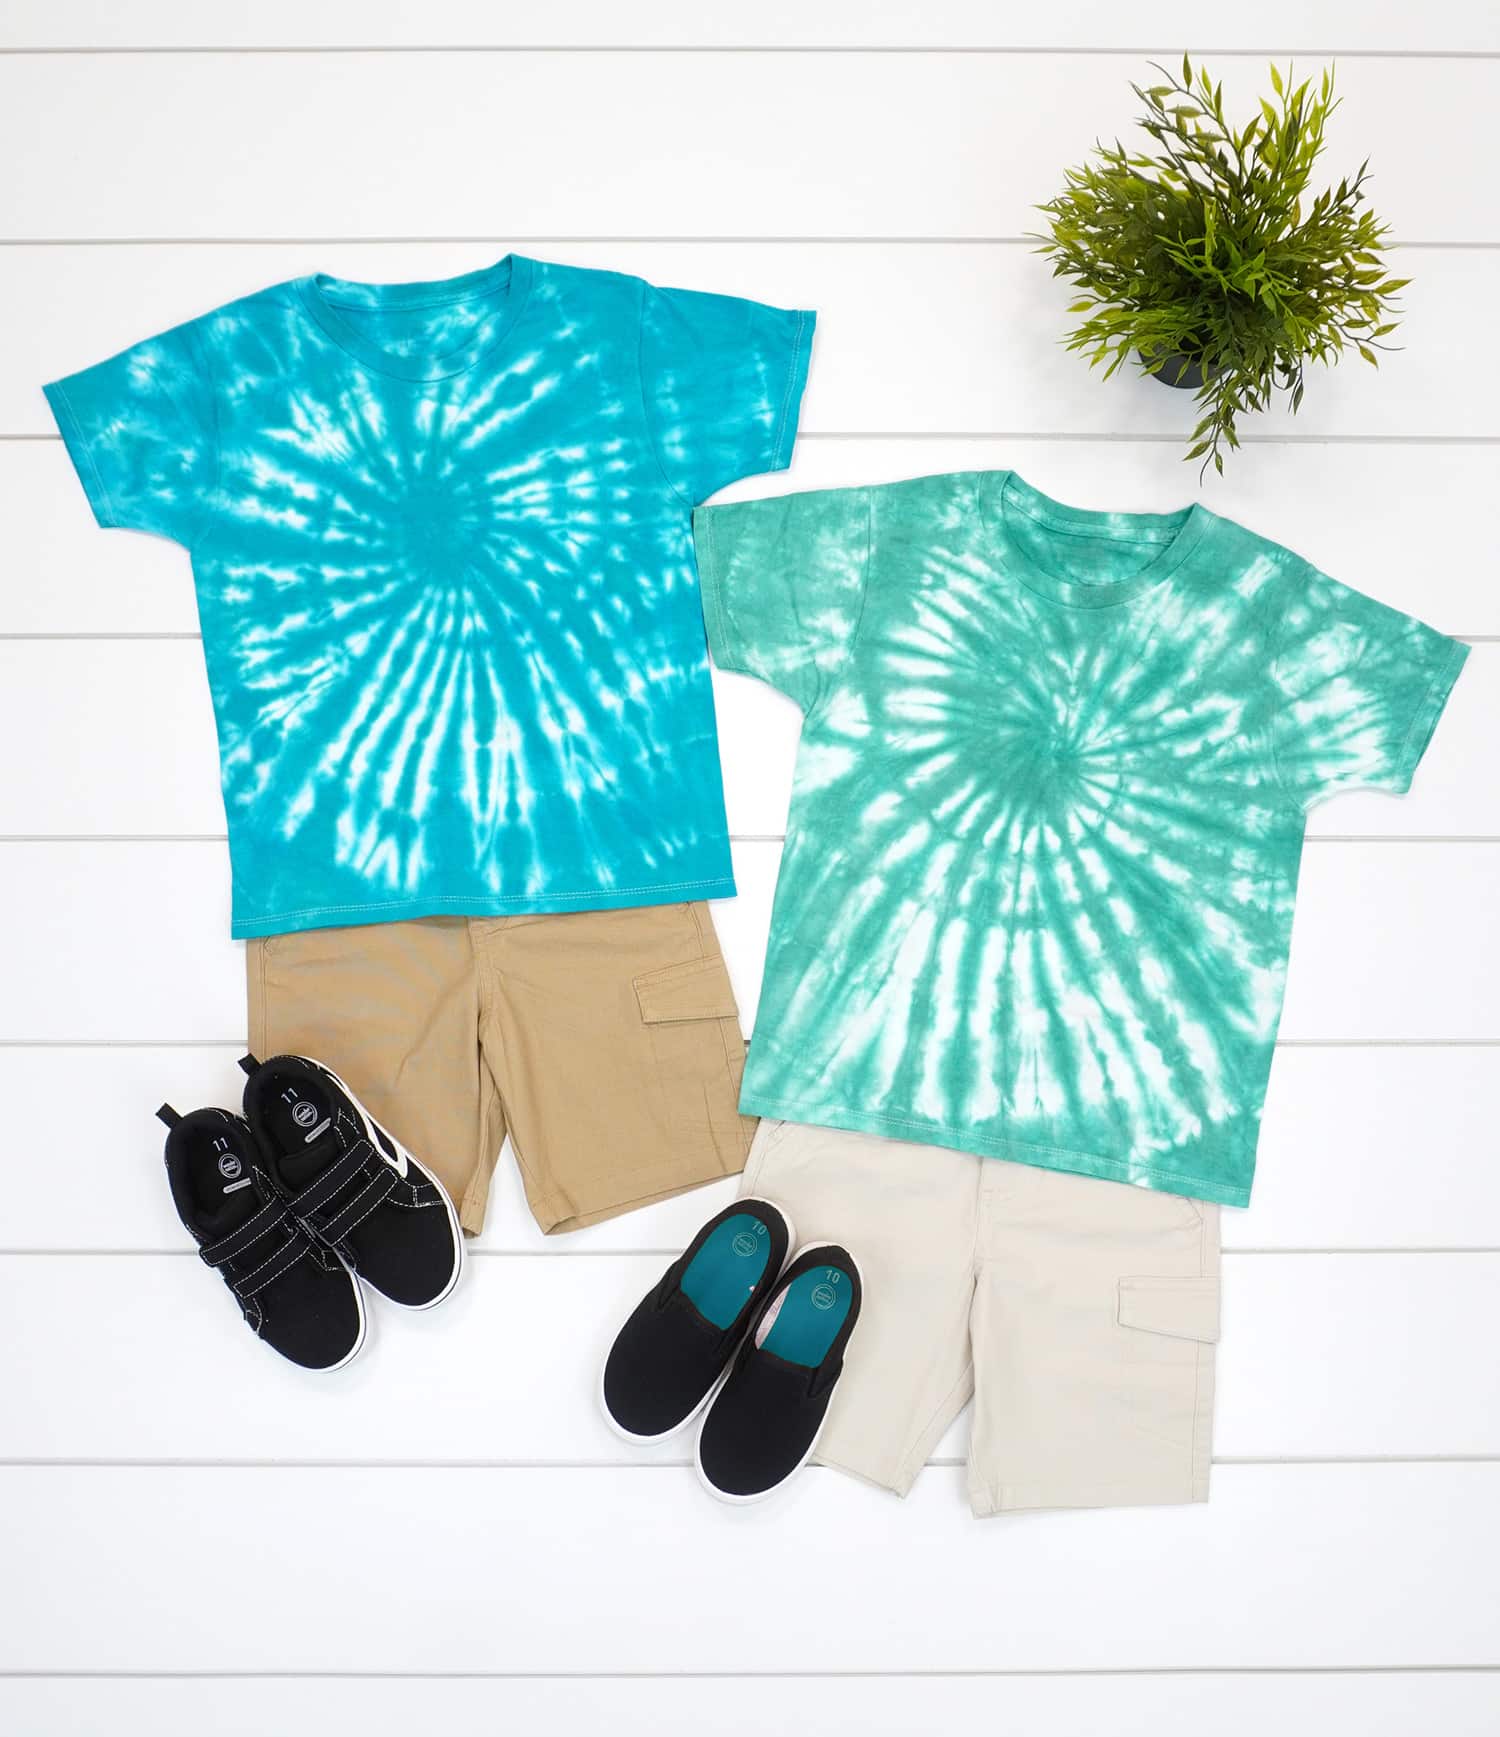 Two blue and green spiral tie-dye shirt on a white wood background with shorts and shoes